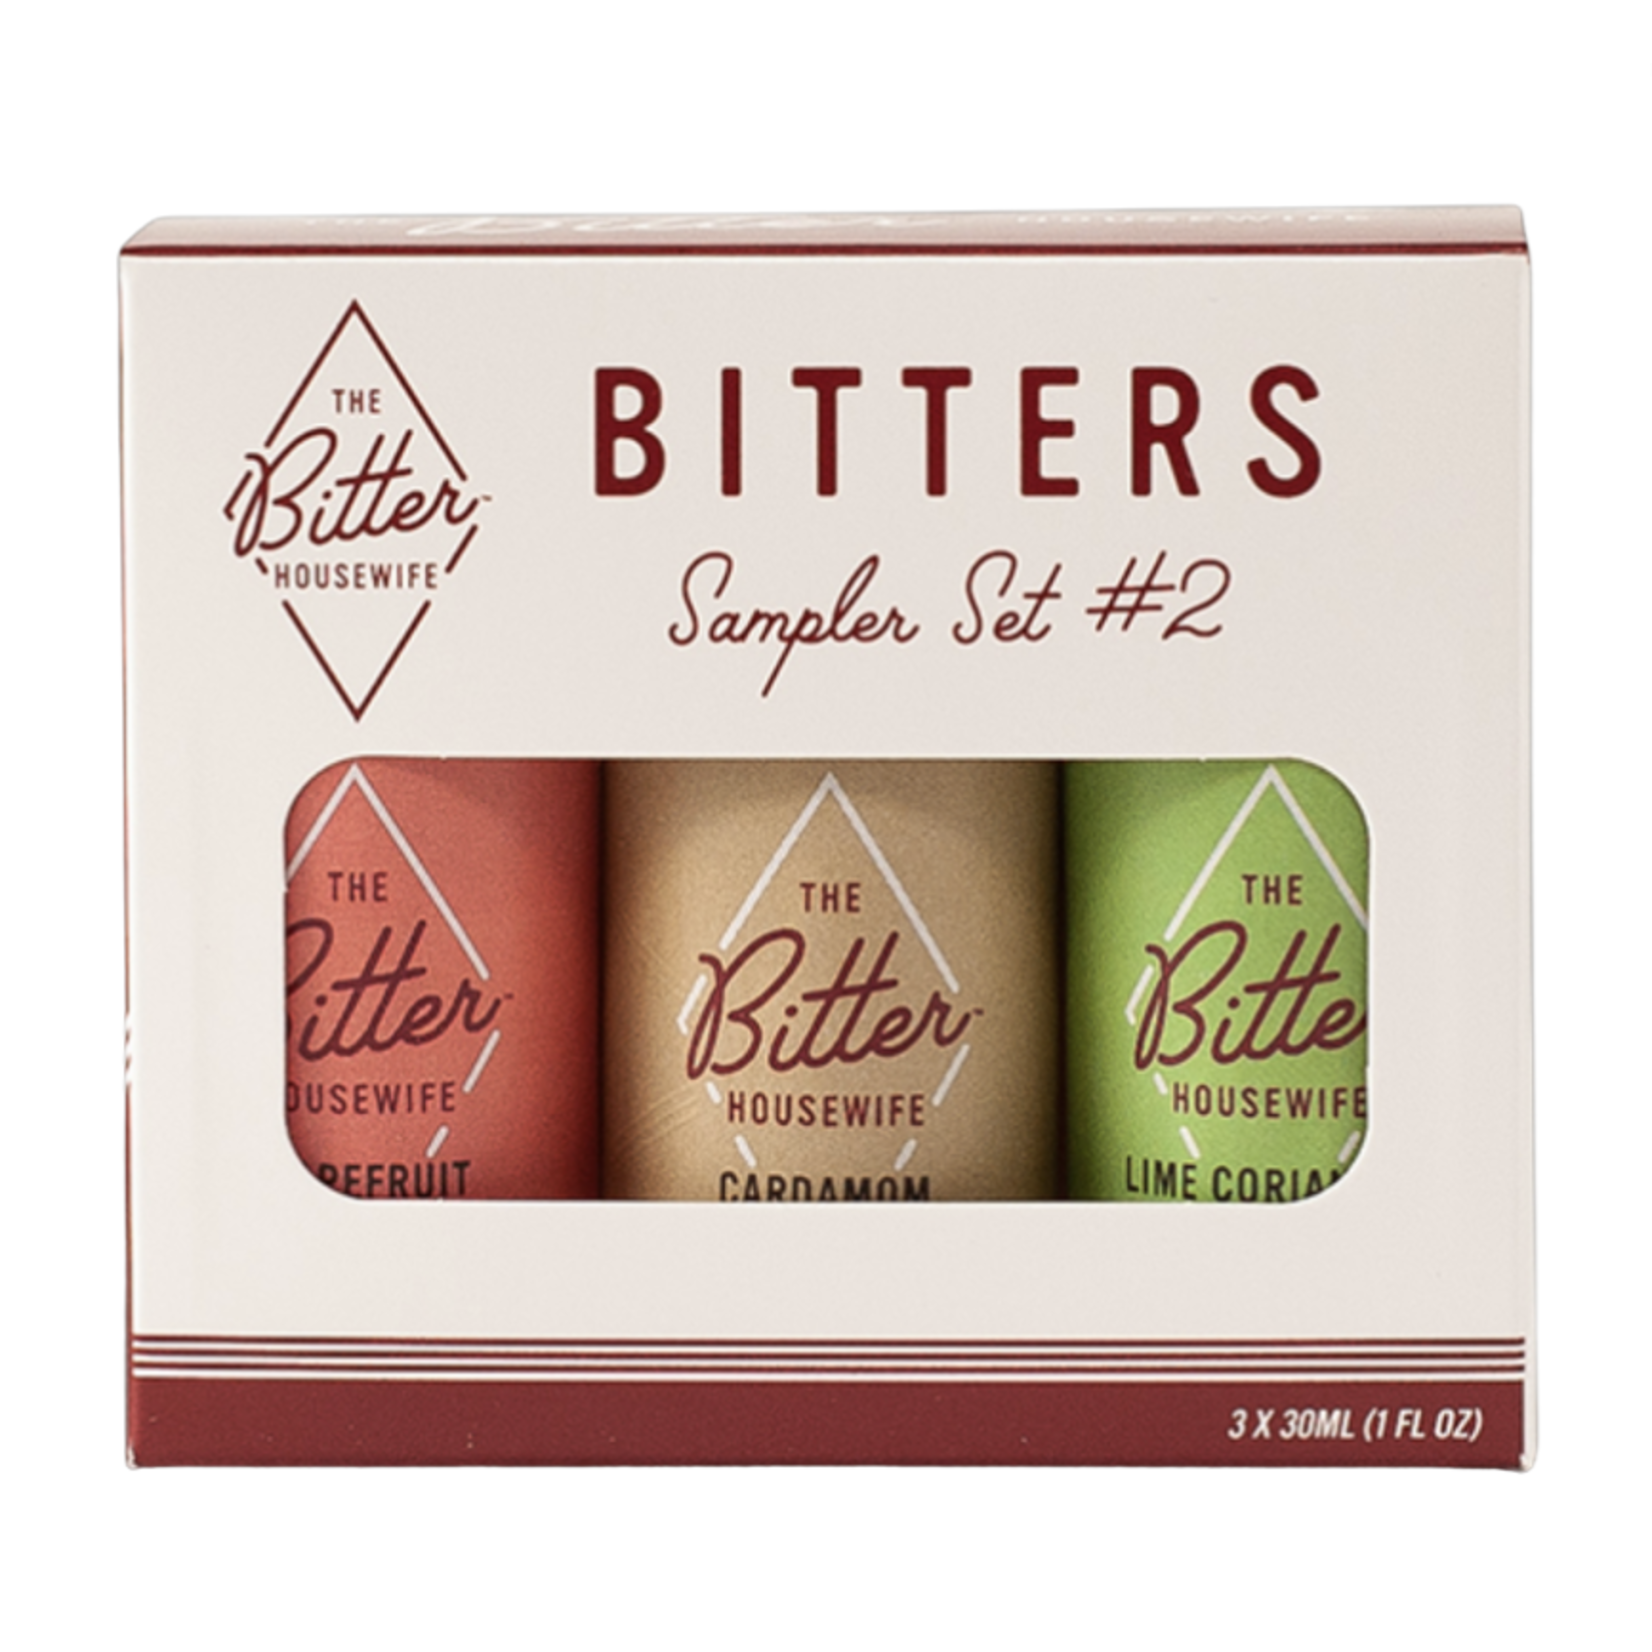 The Bitter Housewife Cocktail Bitters Sampler Set #2